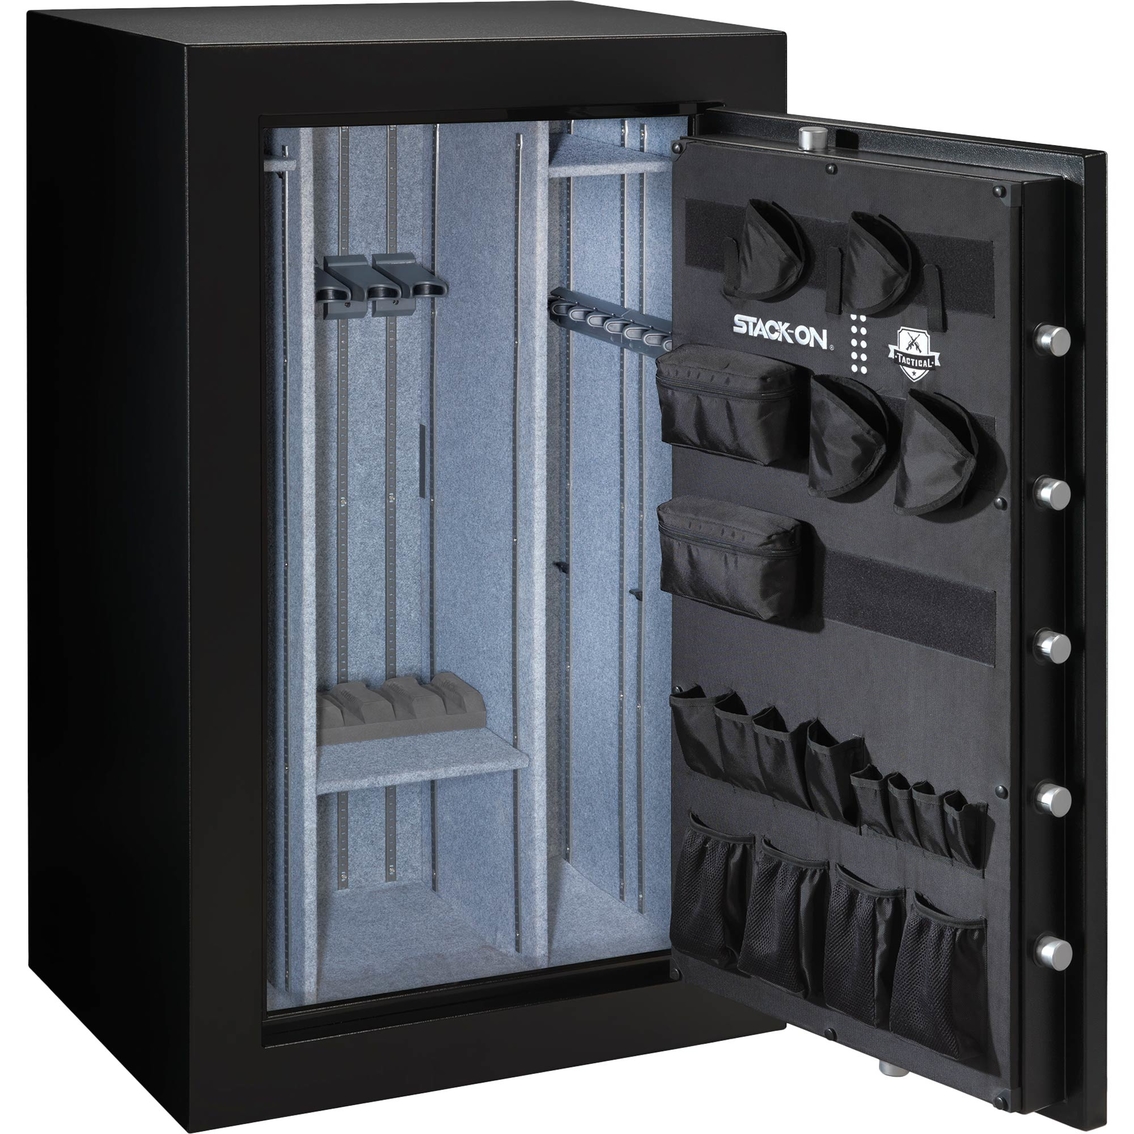 Stack-On 20 Gun Tactical Fire Safe - Image 2 of 6